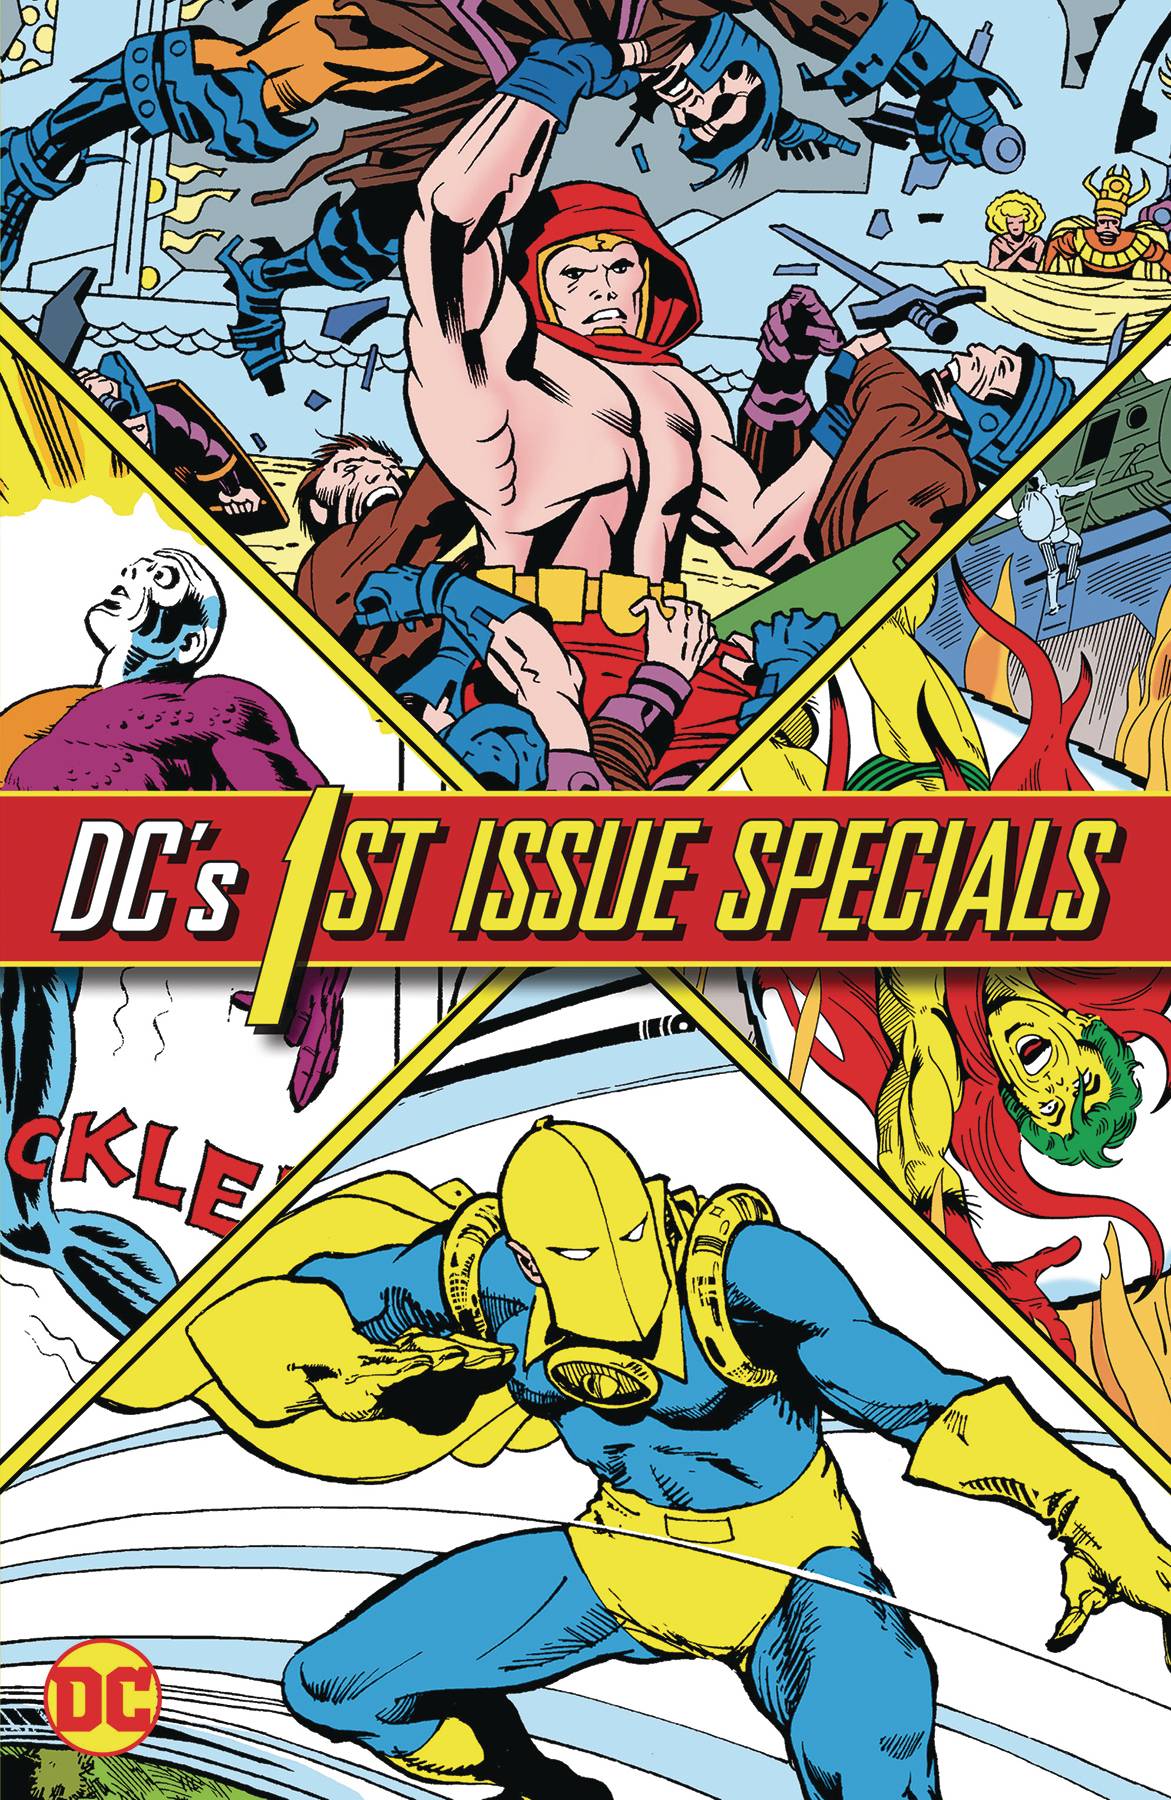 DC FIRST ISSUE SPECIAL HC